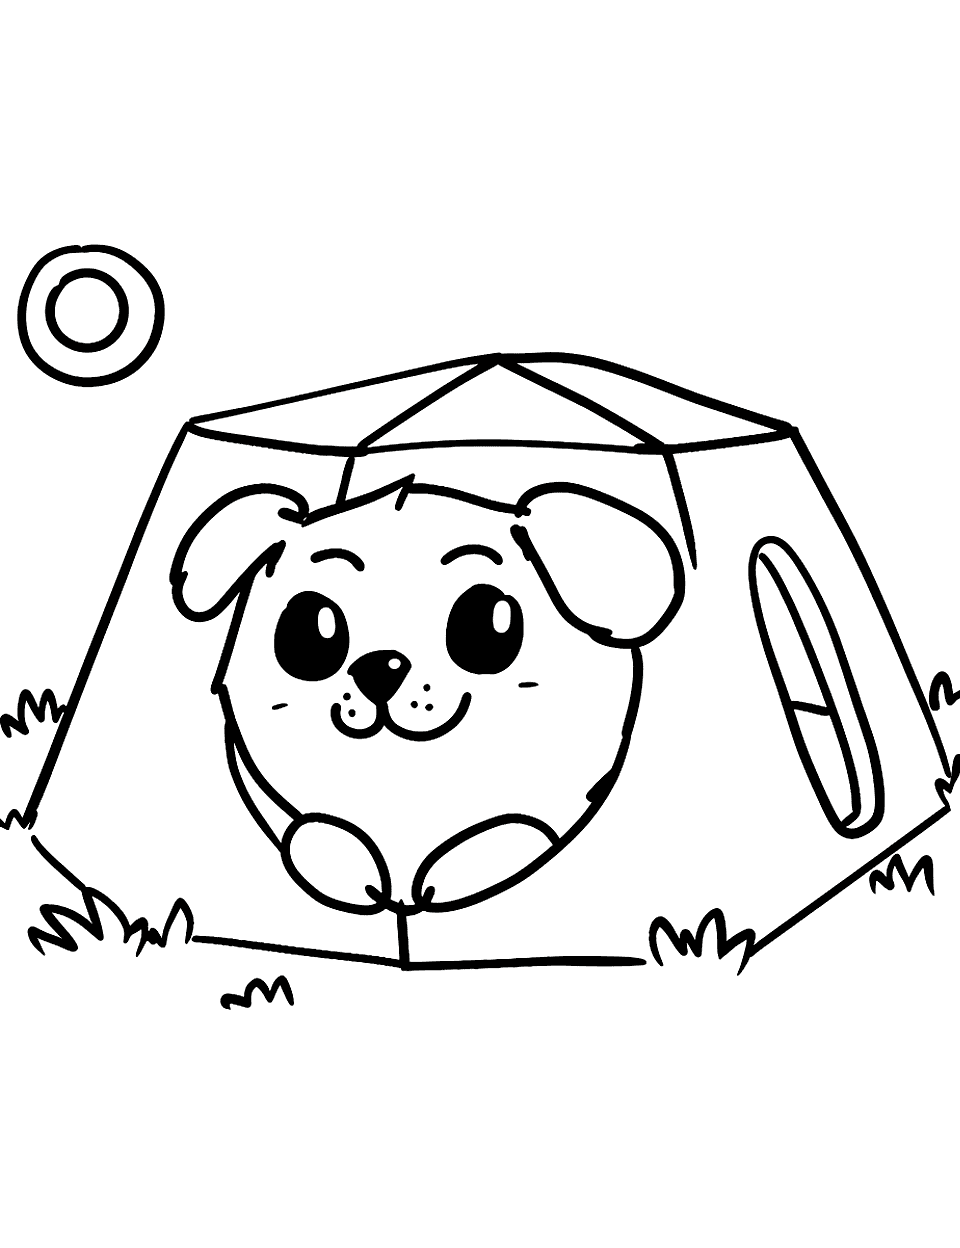 Pentagon Pet House Shapes Coloring Page - A pet house designed like a pentagon, with a dog peeking out.